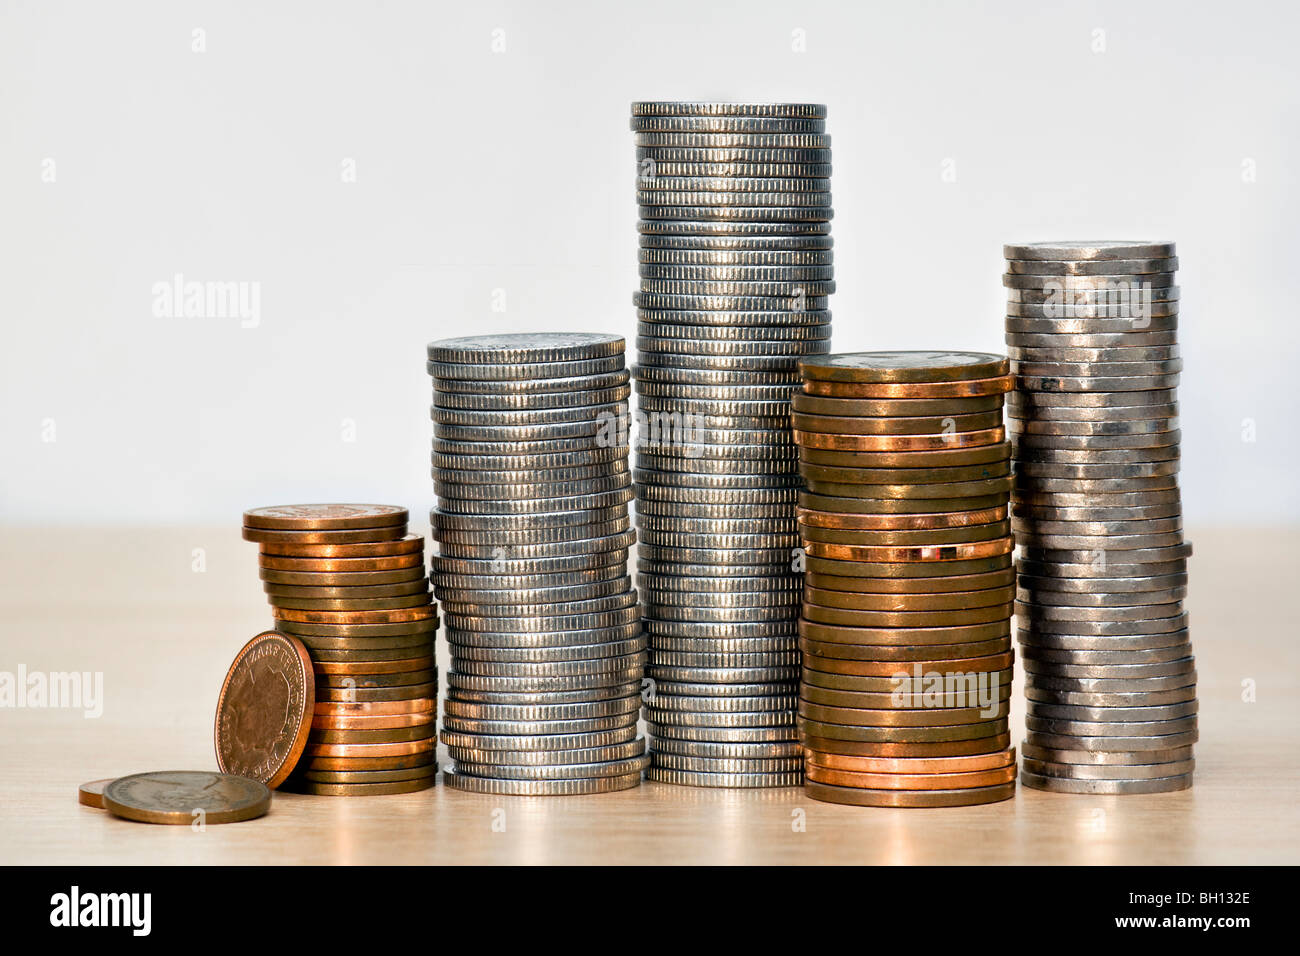 Stacks of English coins or sterling money in silver and coppers Stock Photo